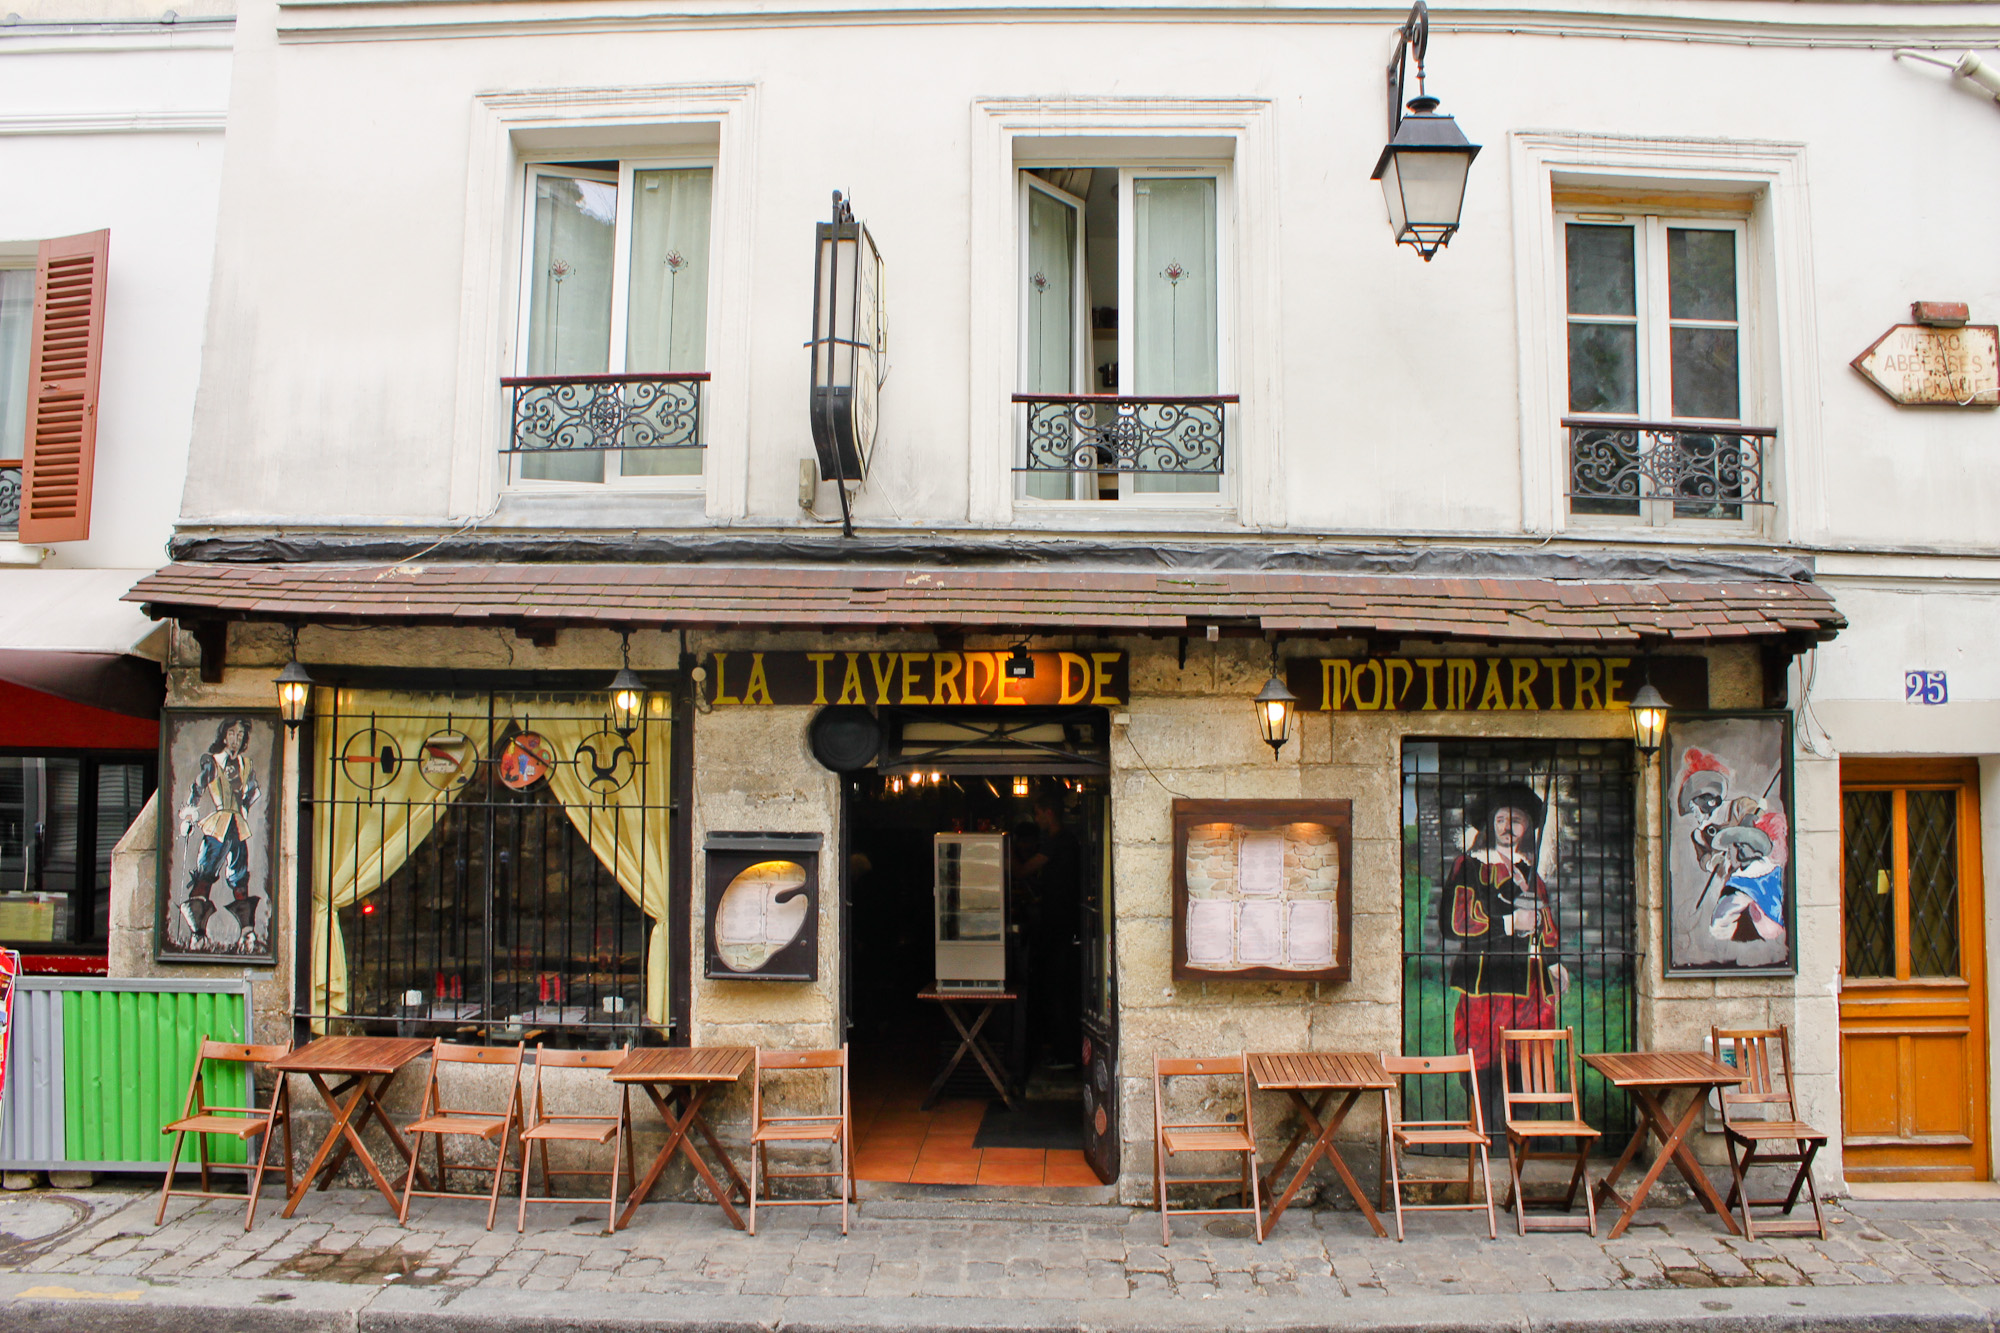 outdoor cafe in europe, the doors are open